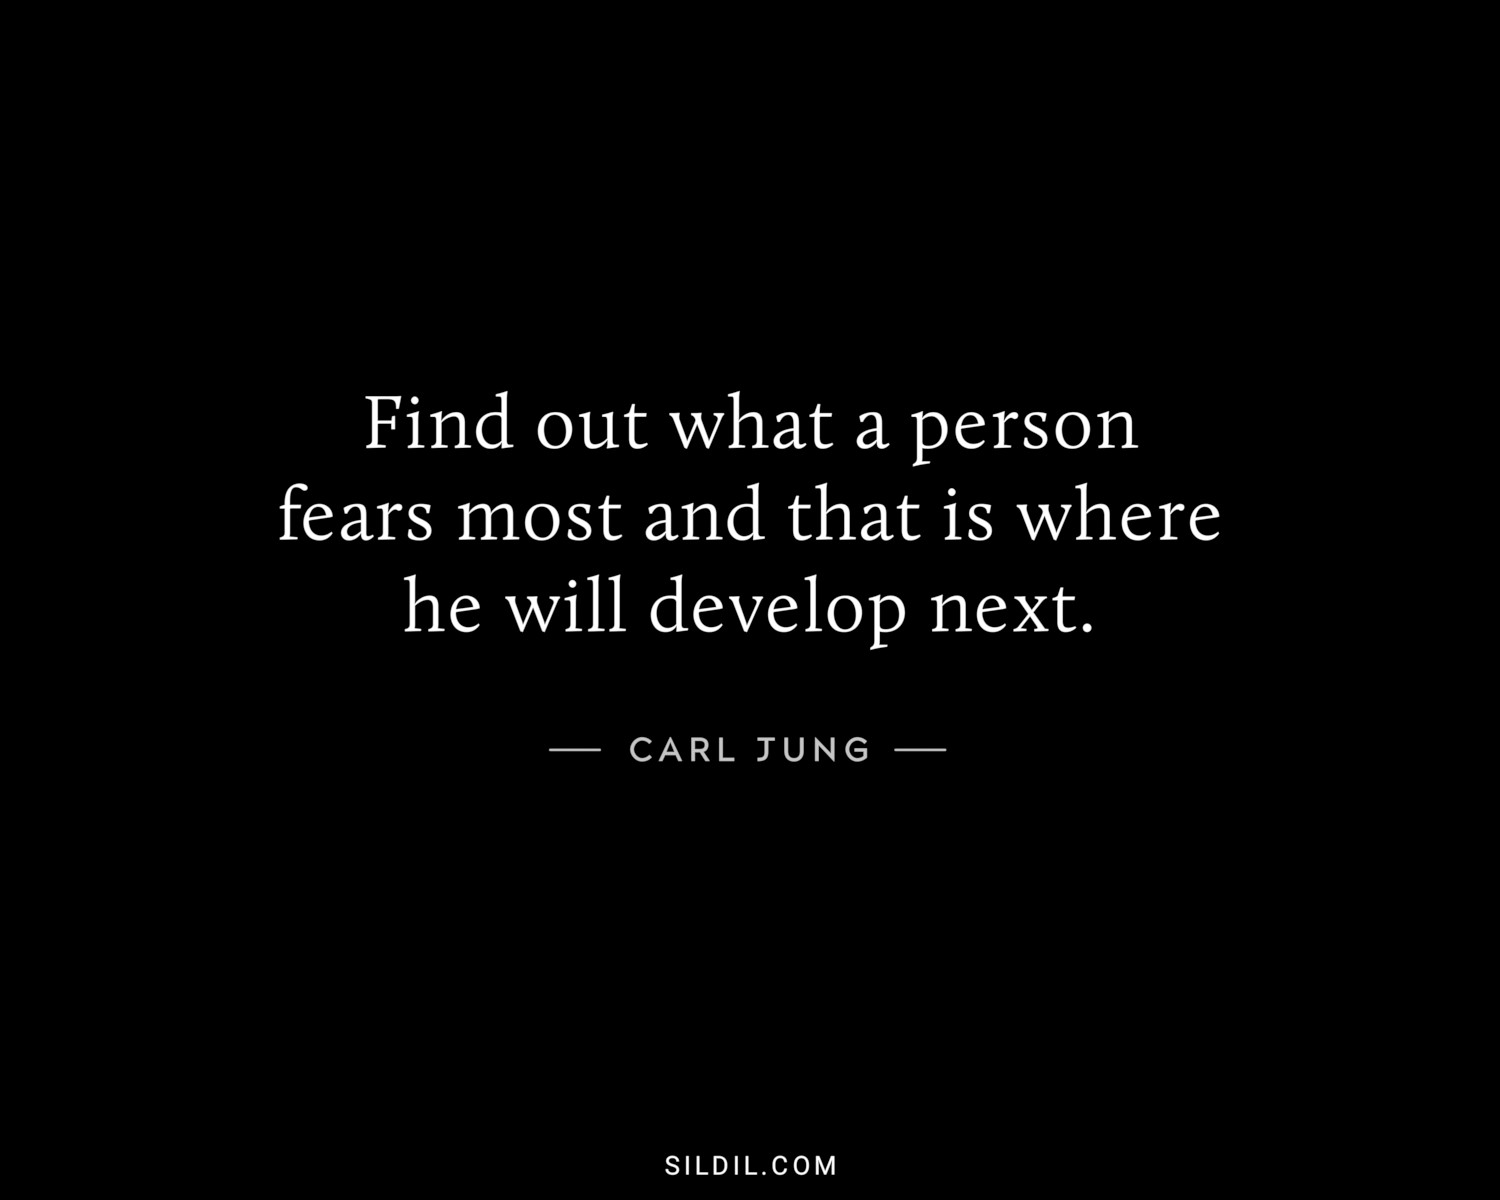 Find out what a person fears most and that is where he will develop next.